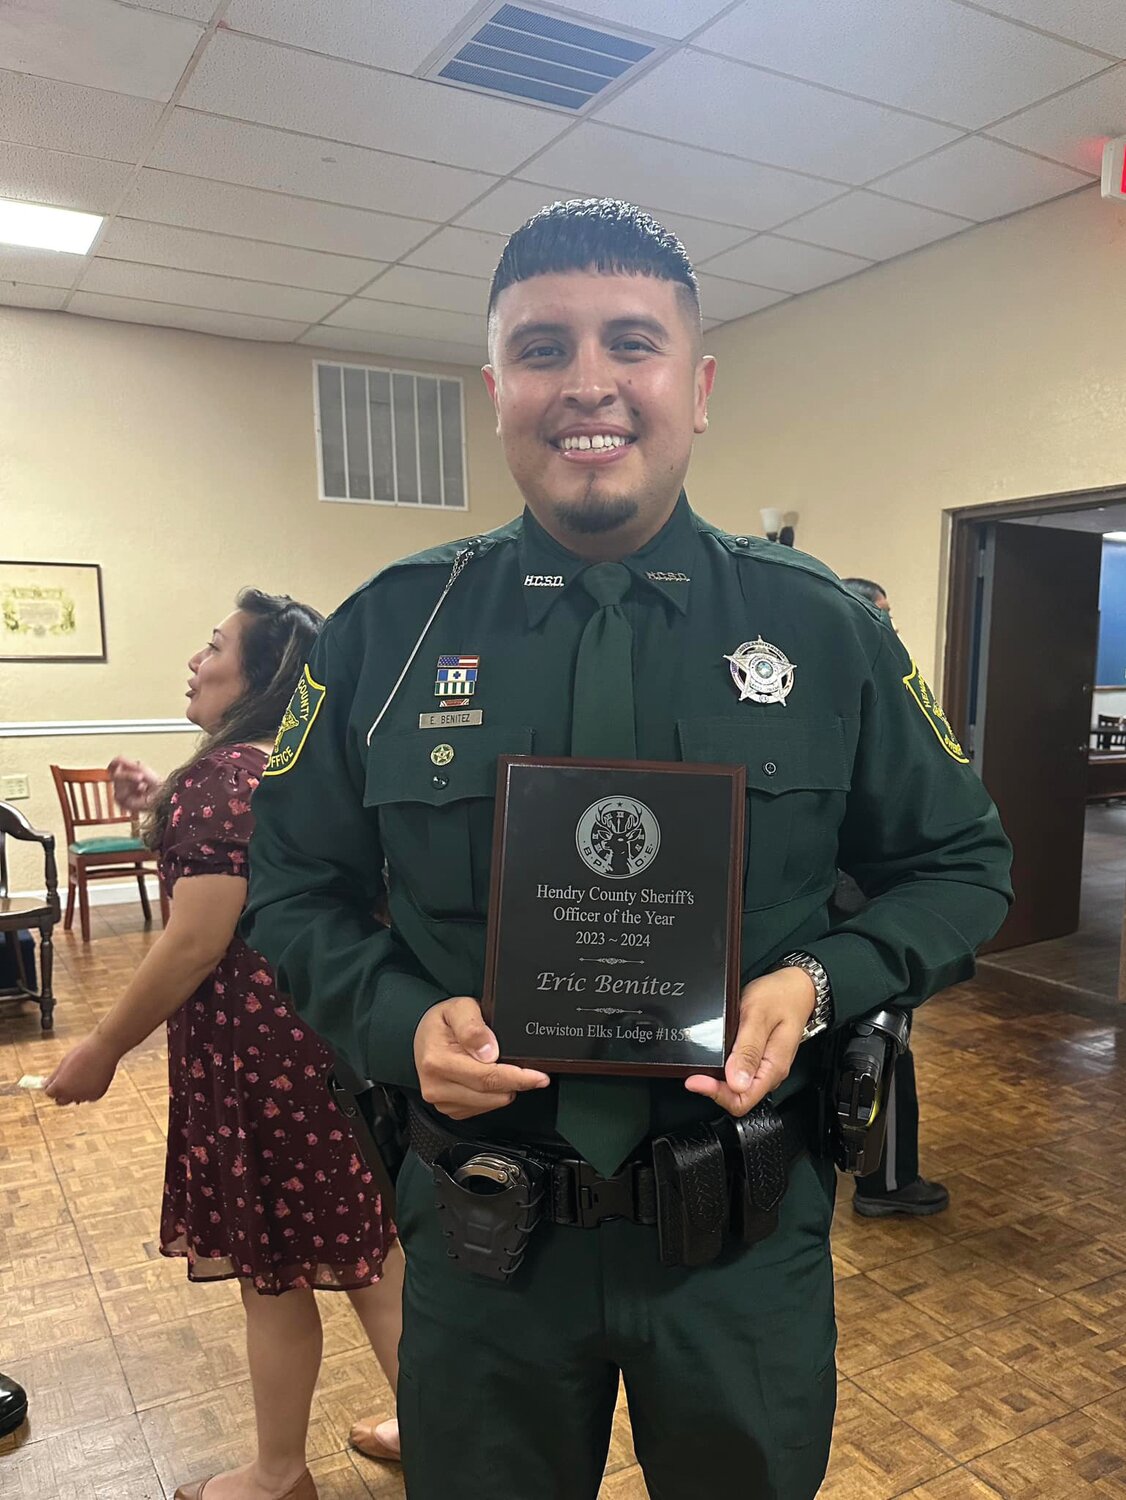 Eastside Elementary School Resource Officer Eric Benitez was selected as Hendry County Sherriff’s Officer of the Year at the Clewiston Elk’s Lodge Community Awards on April 5. [Photo courtesy Eastside Elementary School]